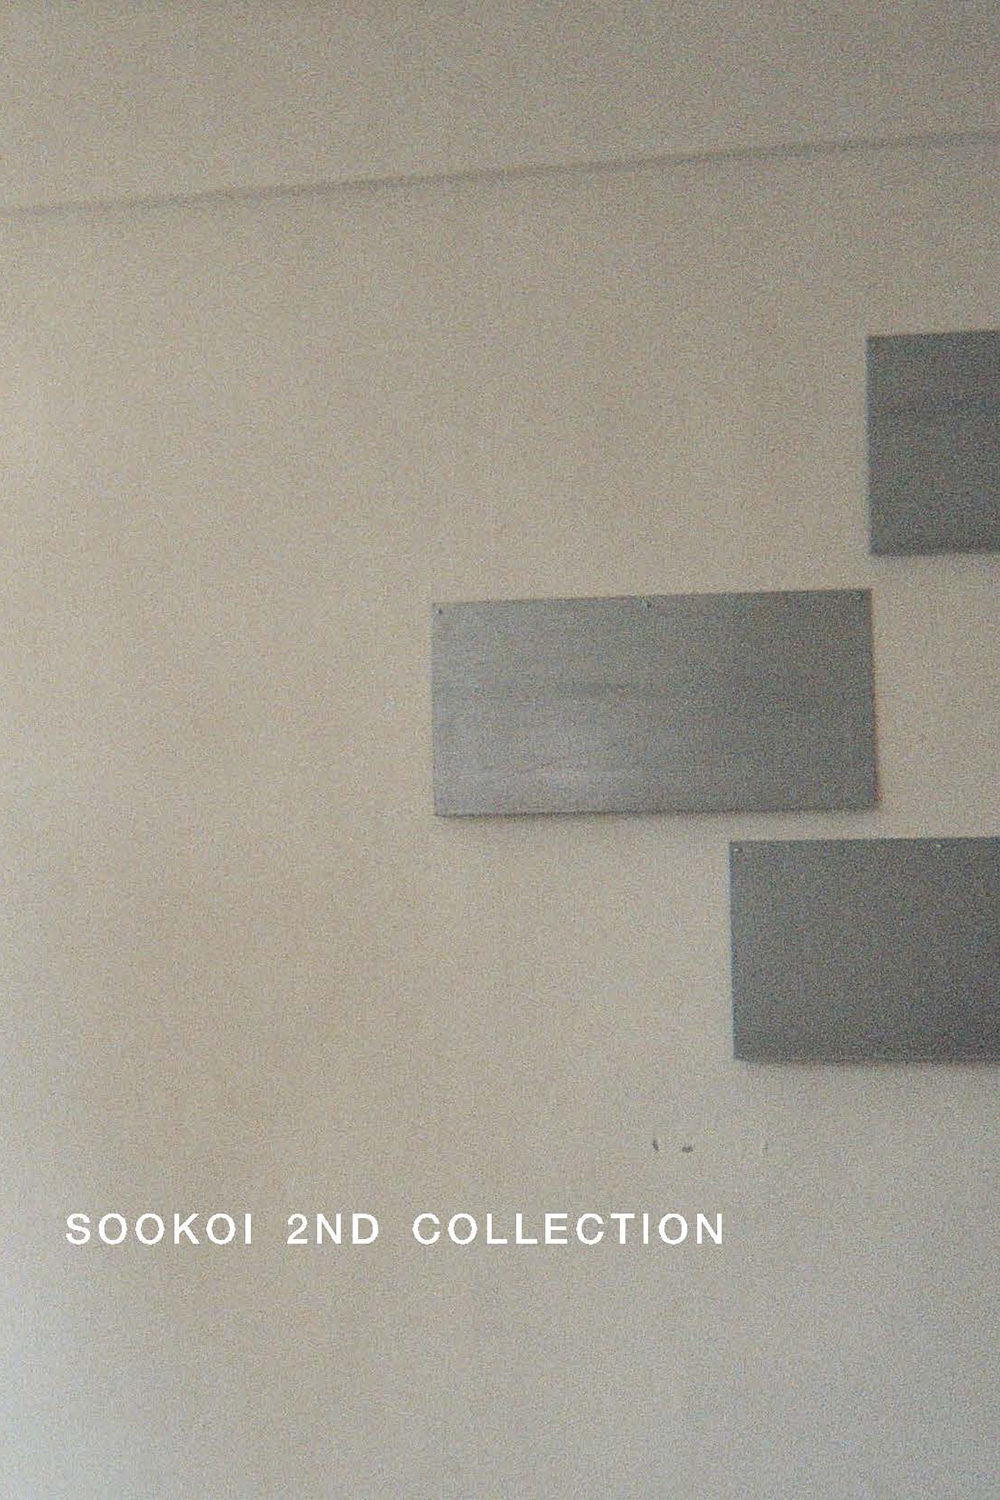 SOOKOI 2nd Collection / RAW IMAGE